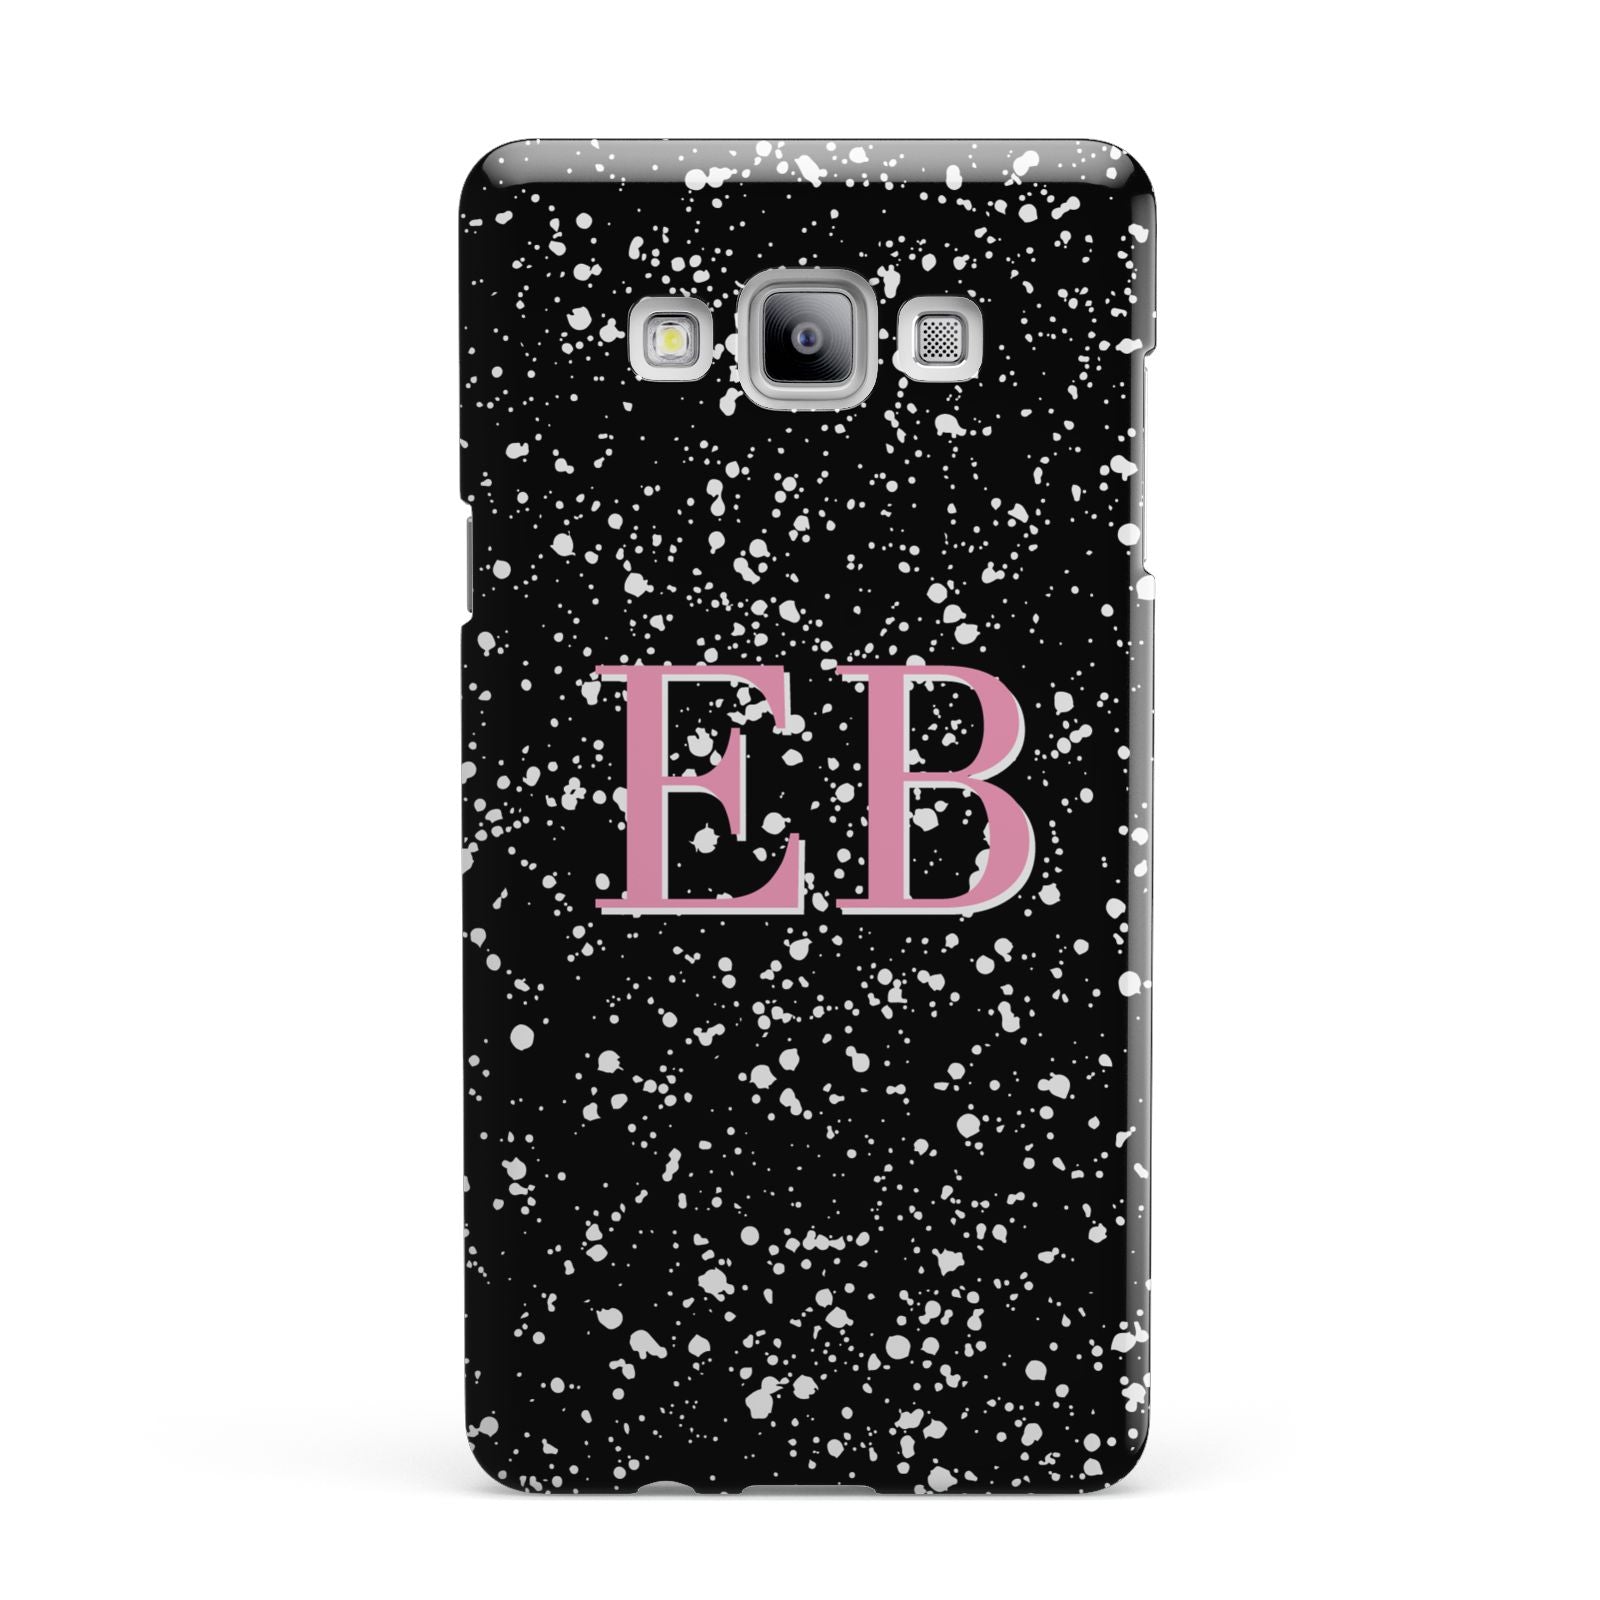 Personalised Black Ink Splat Initials Samsung Galaxy A7 2015 Case